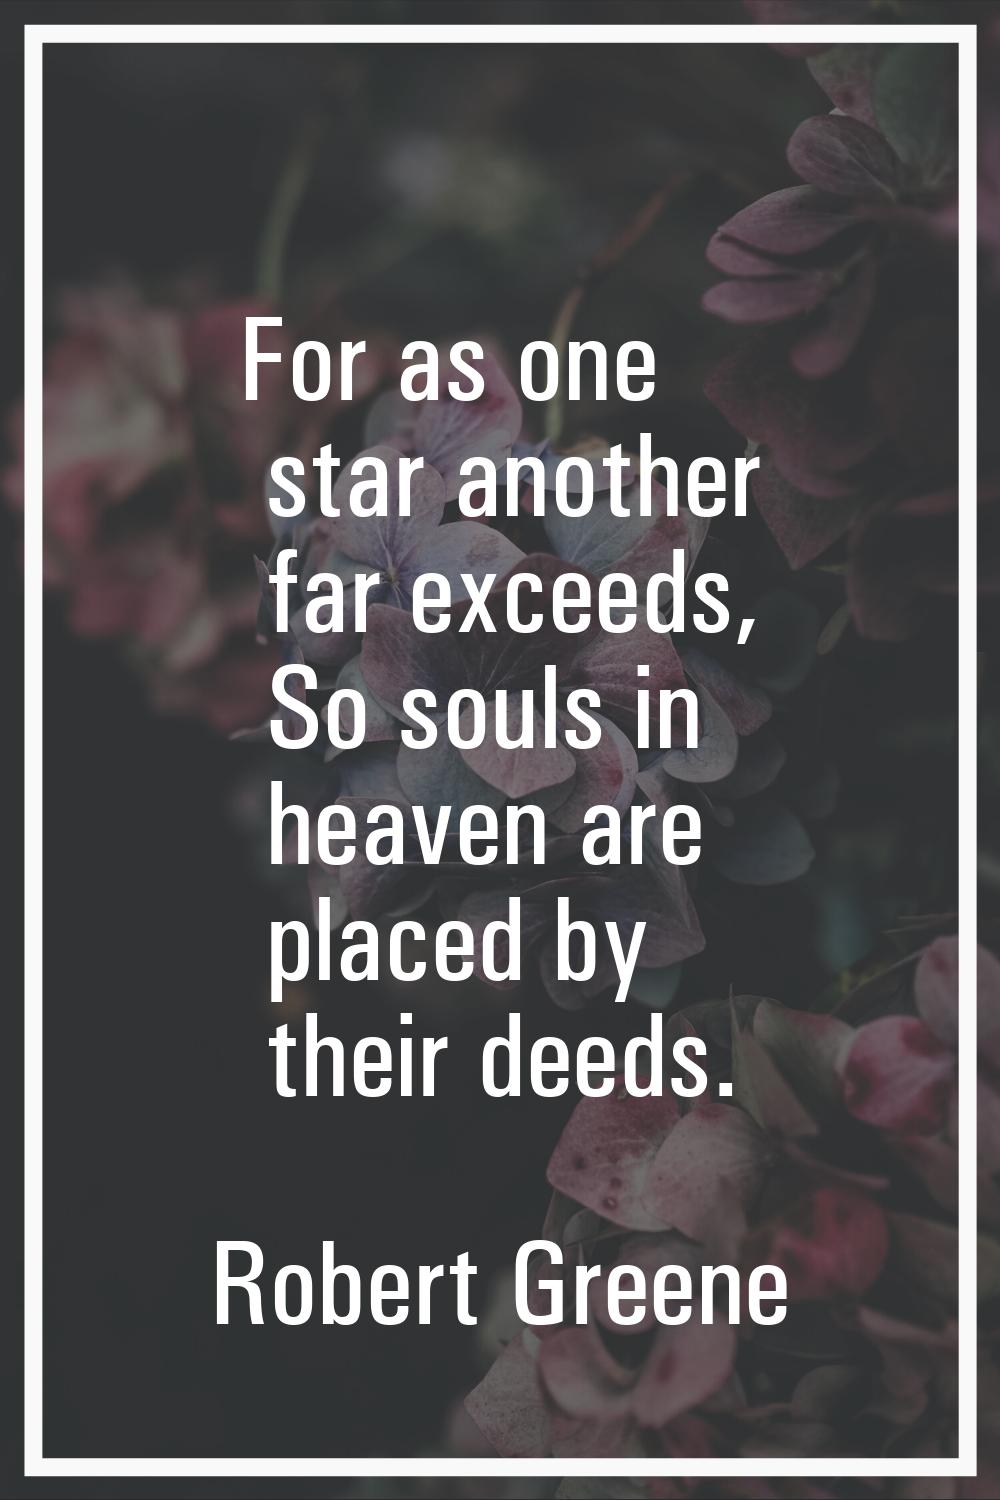 For as one star another far exceeds, So souls in heaven are placed by their deeds.